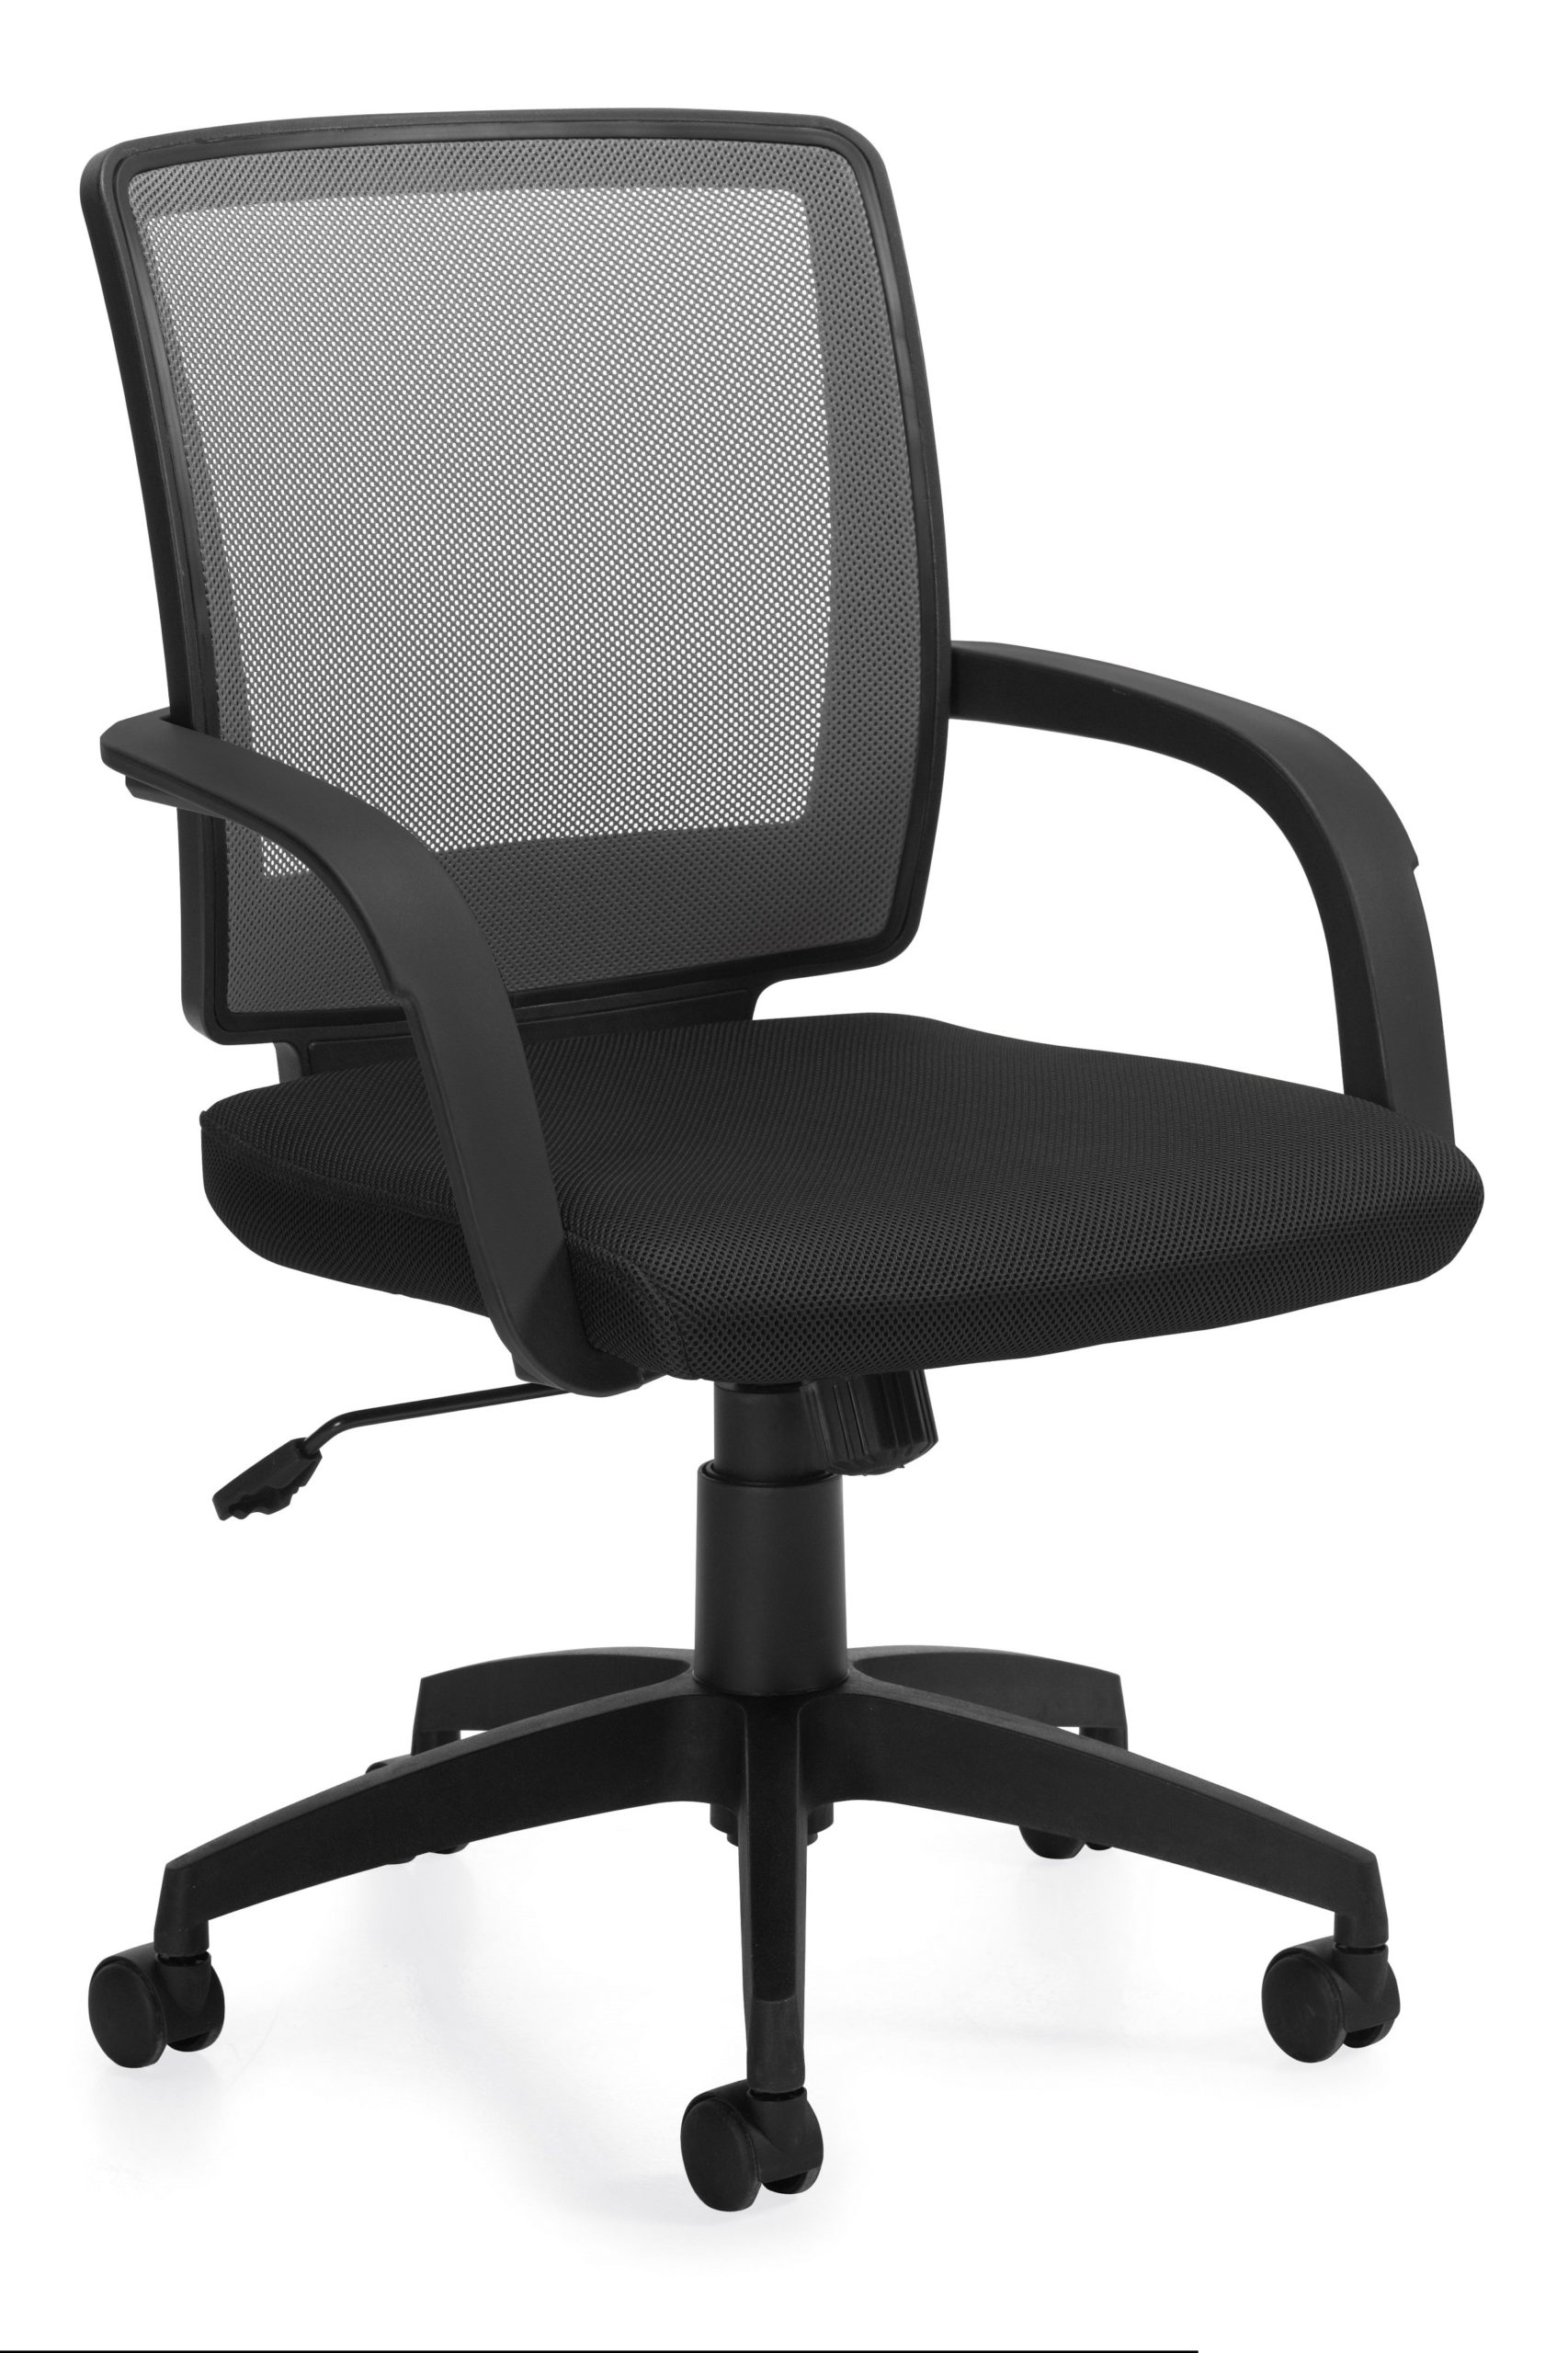 Medium back swivel-tilt conference chair with gray mesh, plastic loop arms, fabric seat, tilt lock, and tilt tension.